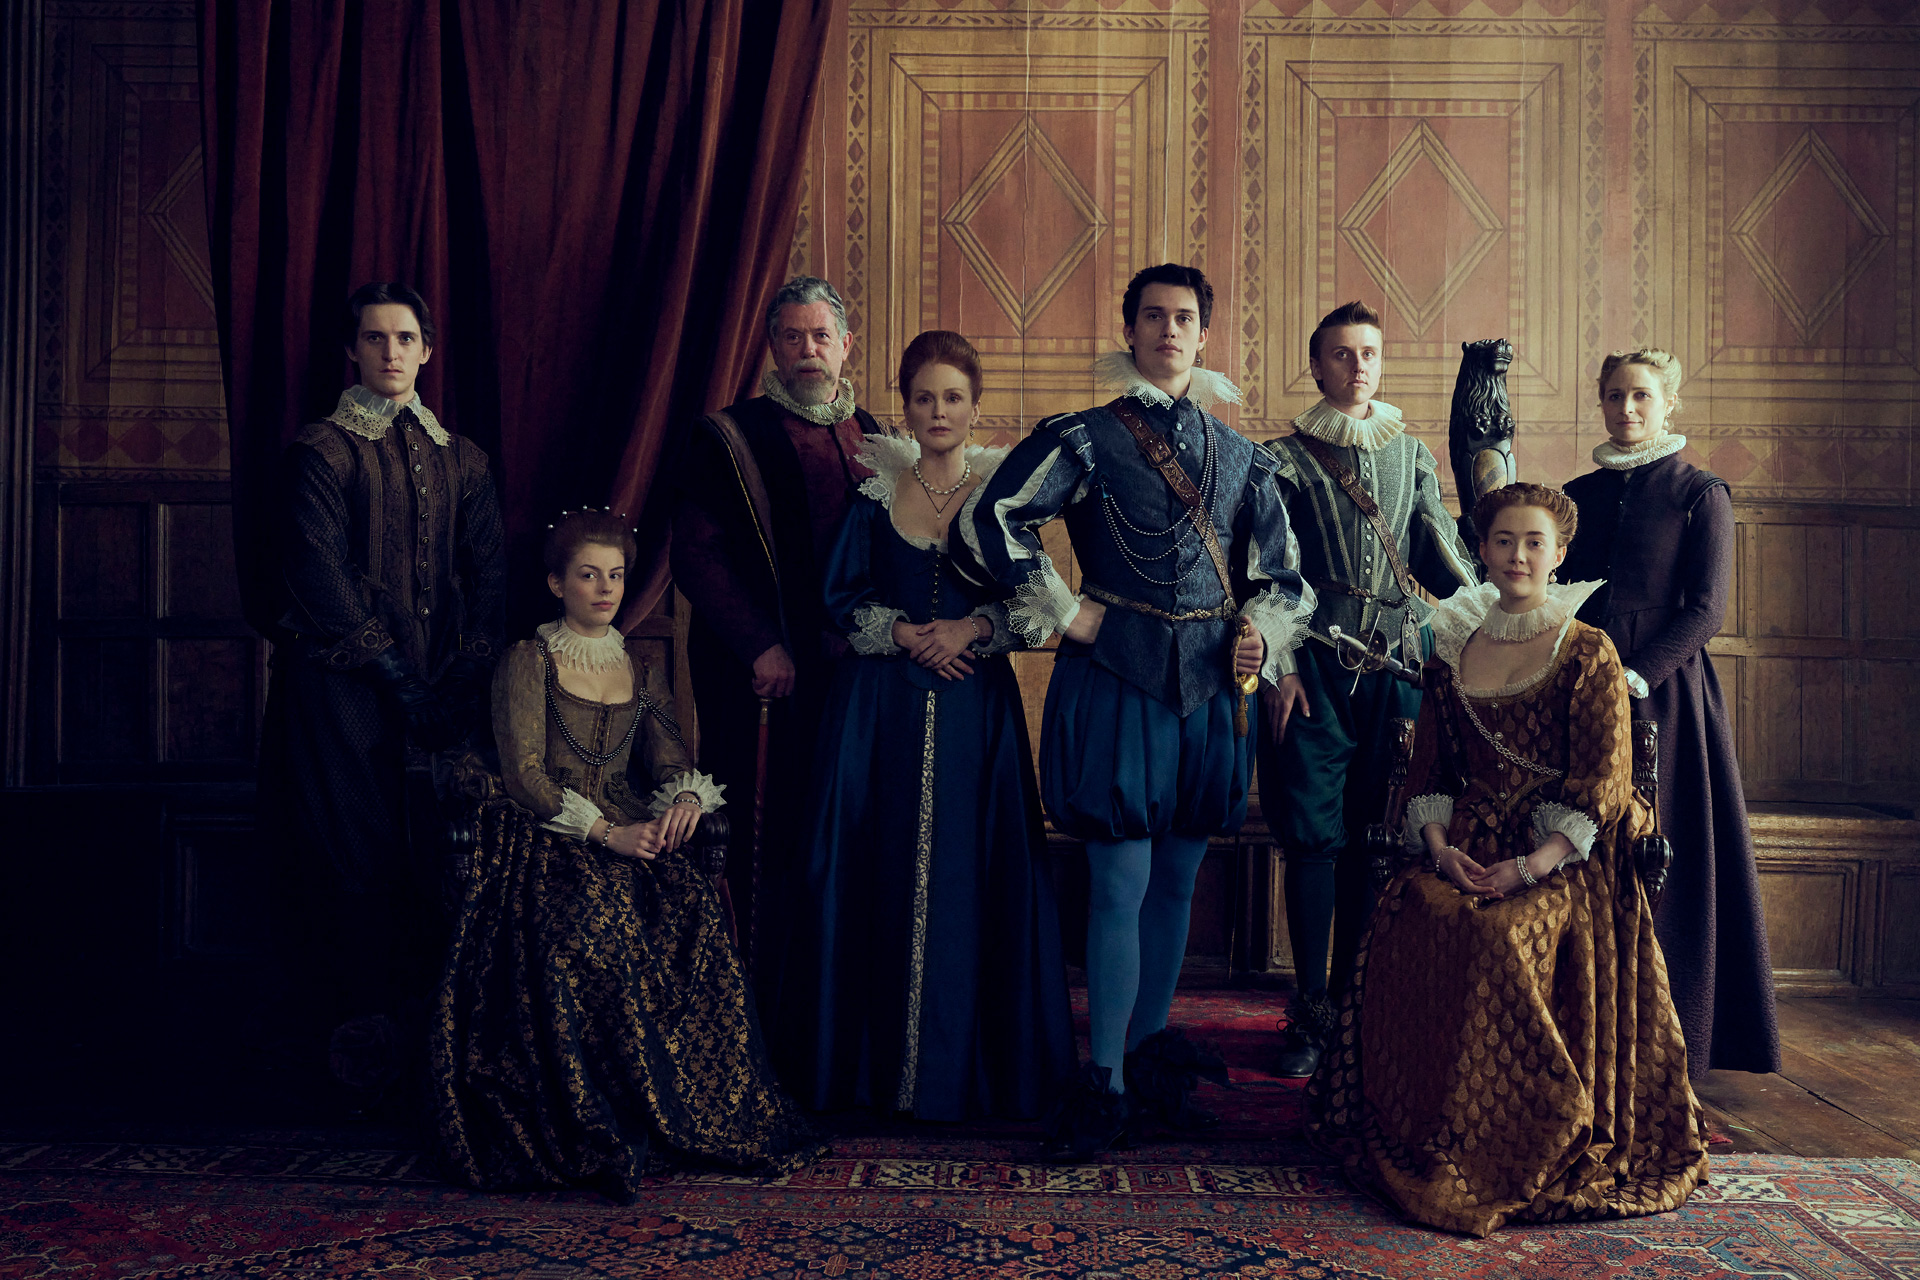 The cast of Mary & George